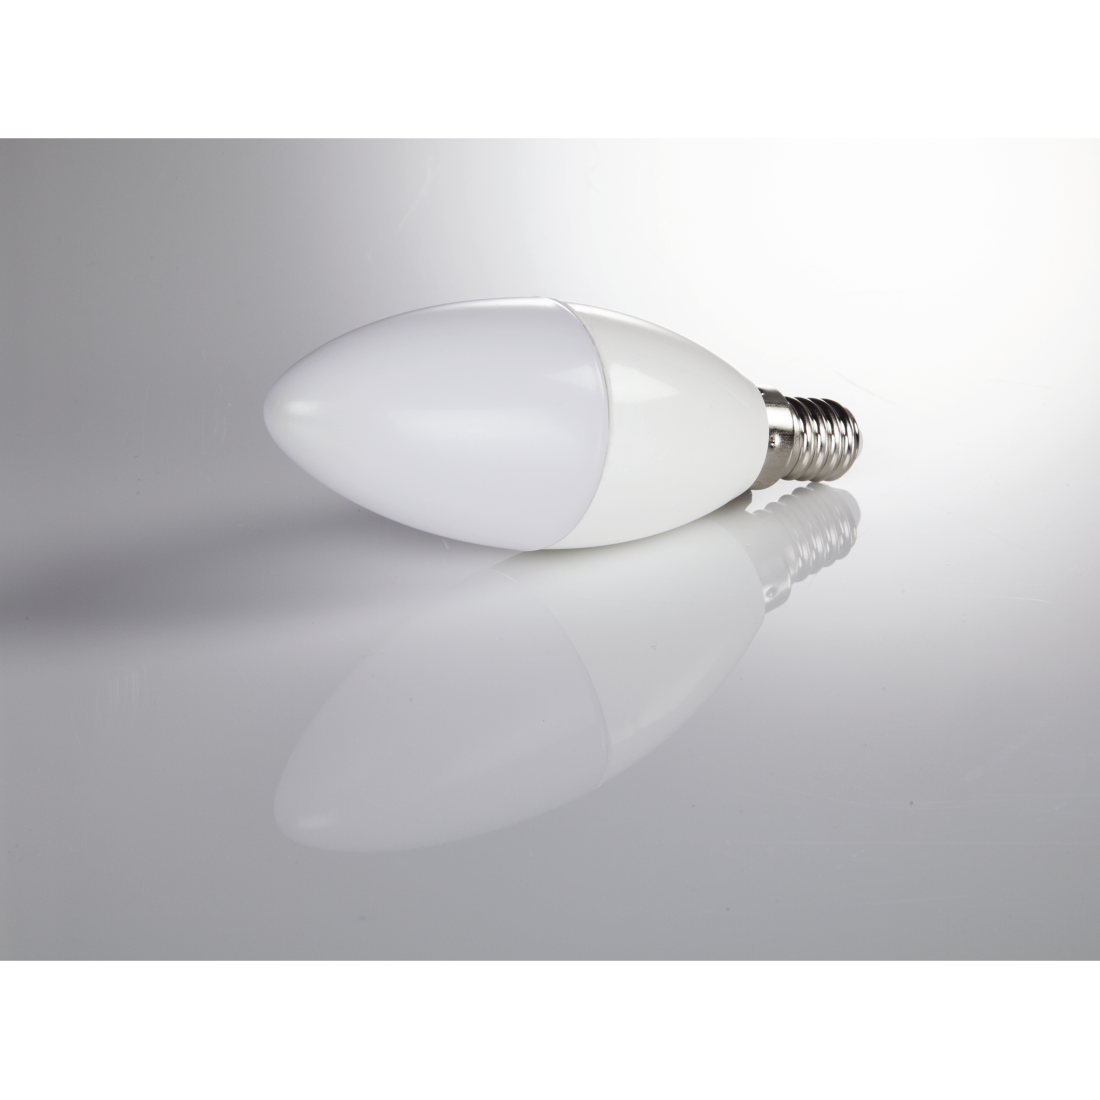 abx3 High-Res Image 3 - Xavax, LED Bulb, E14, 470 lm replaces 40W, Candle Bulb, warm white, 3-stage dim.